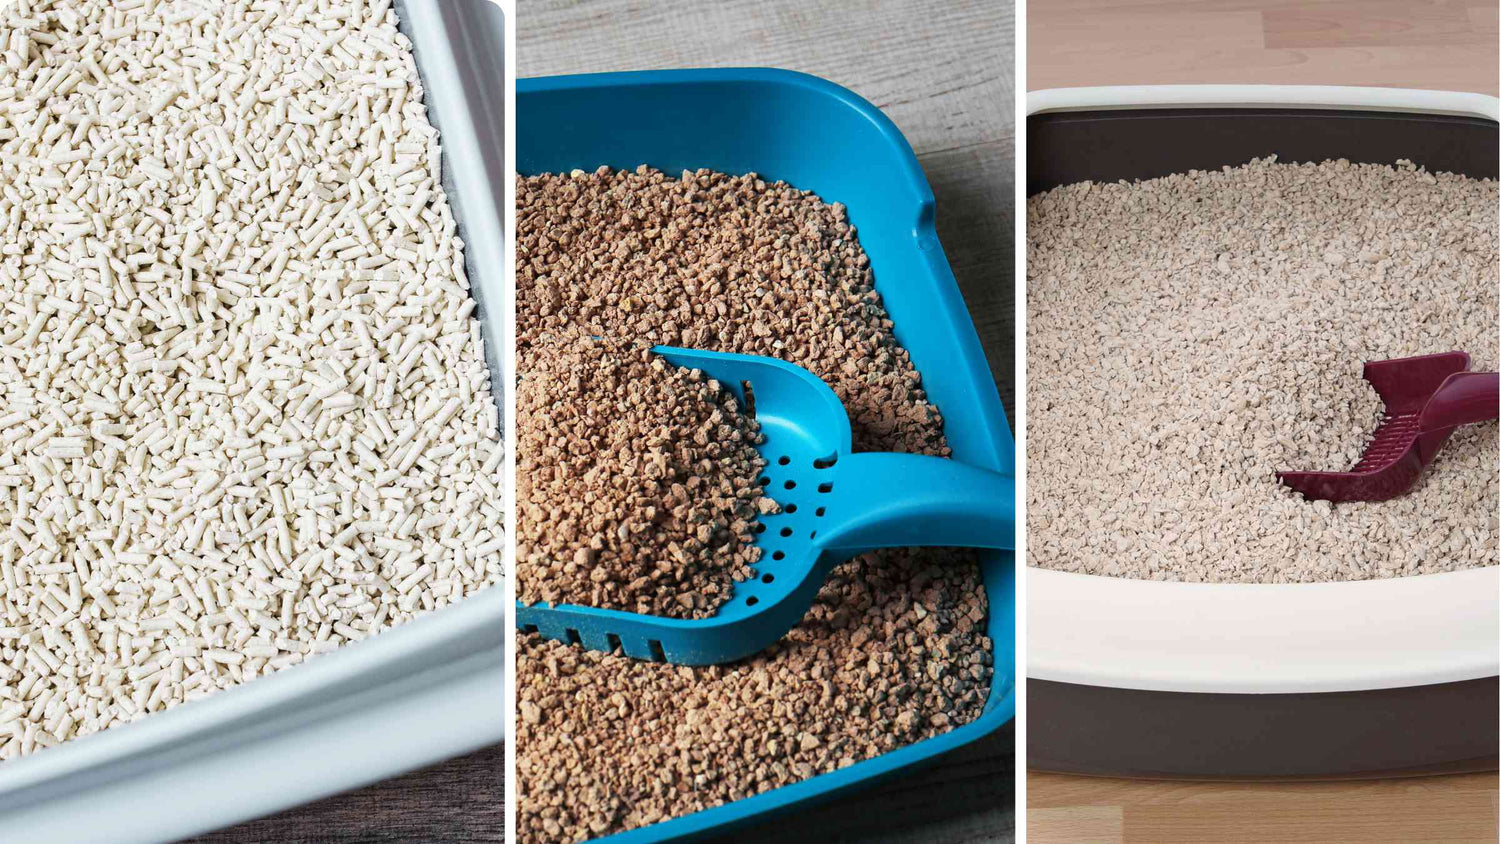 What are the Healthiest Cat Litters - tofu cat litter box vs wheat cat litter box vs corn cat litter box